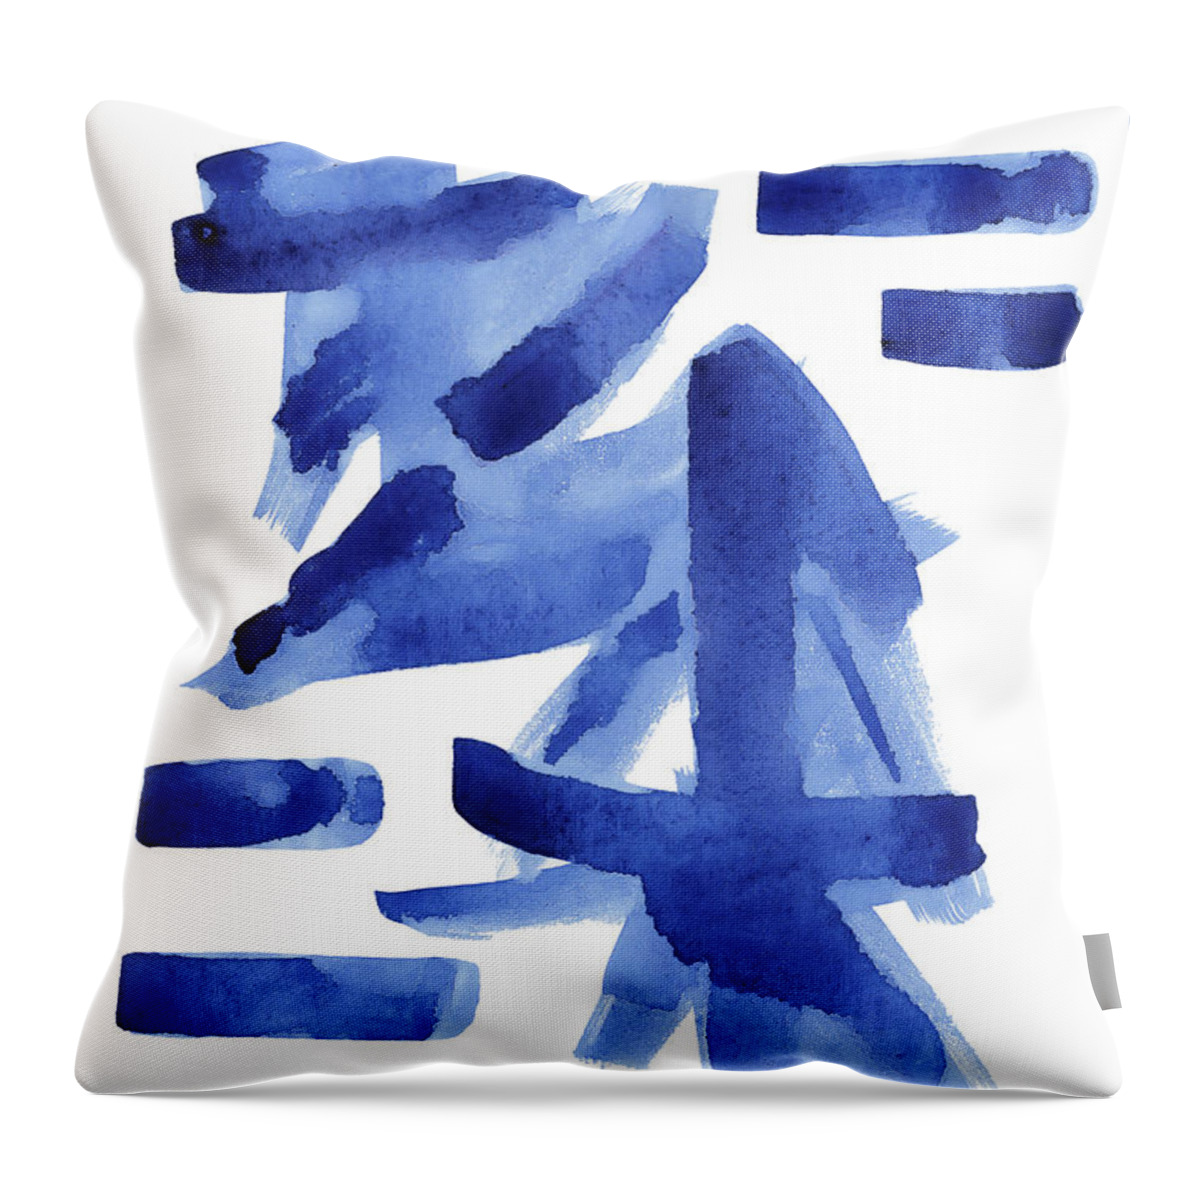 Asian Throw Pillow featuring the painting Modern Asian Inspired Abstract Blue and White by Audrey Jeanne Roberts